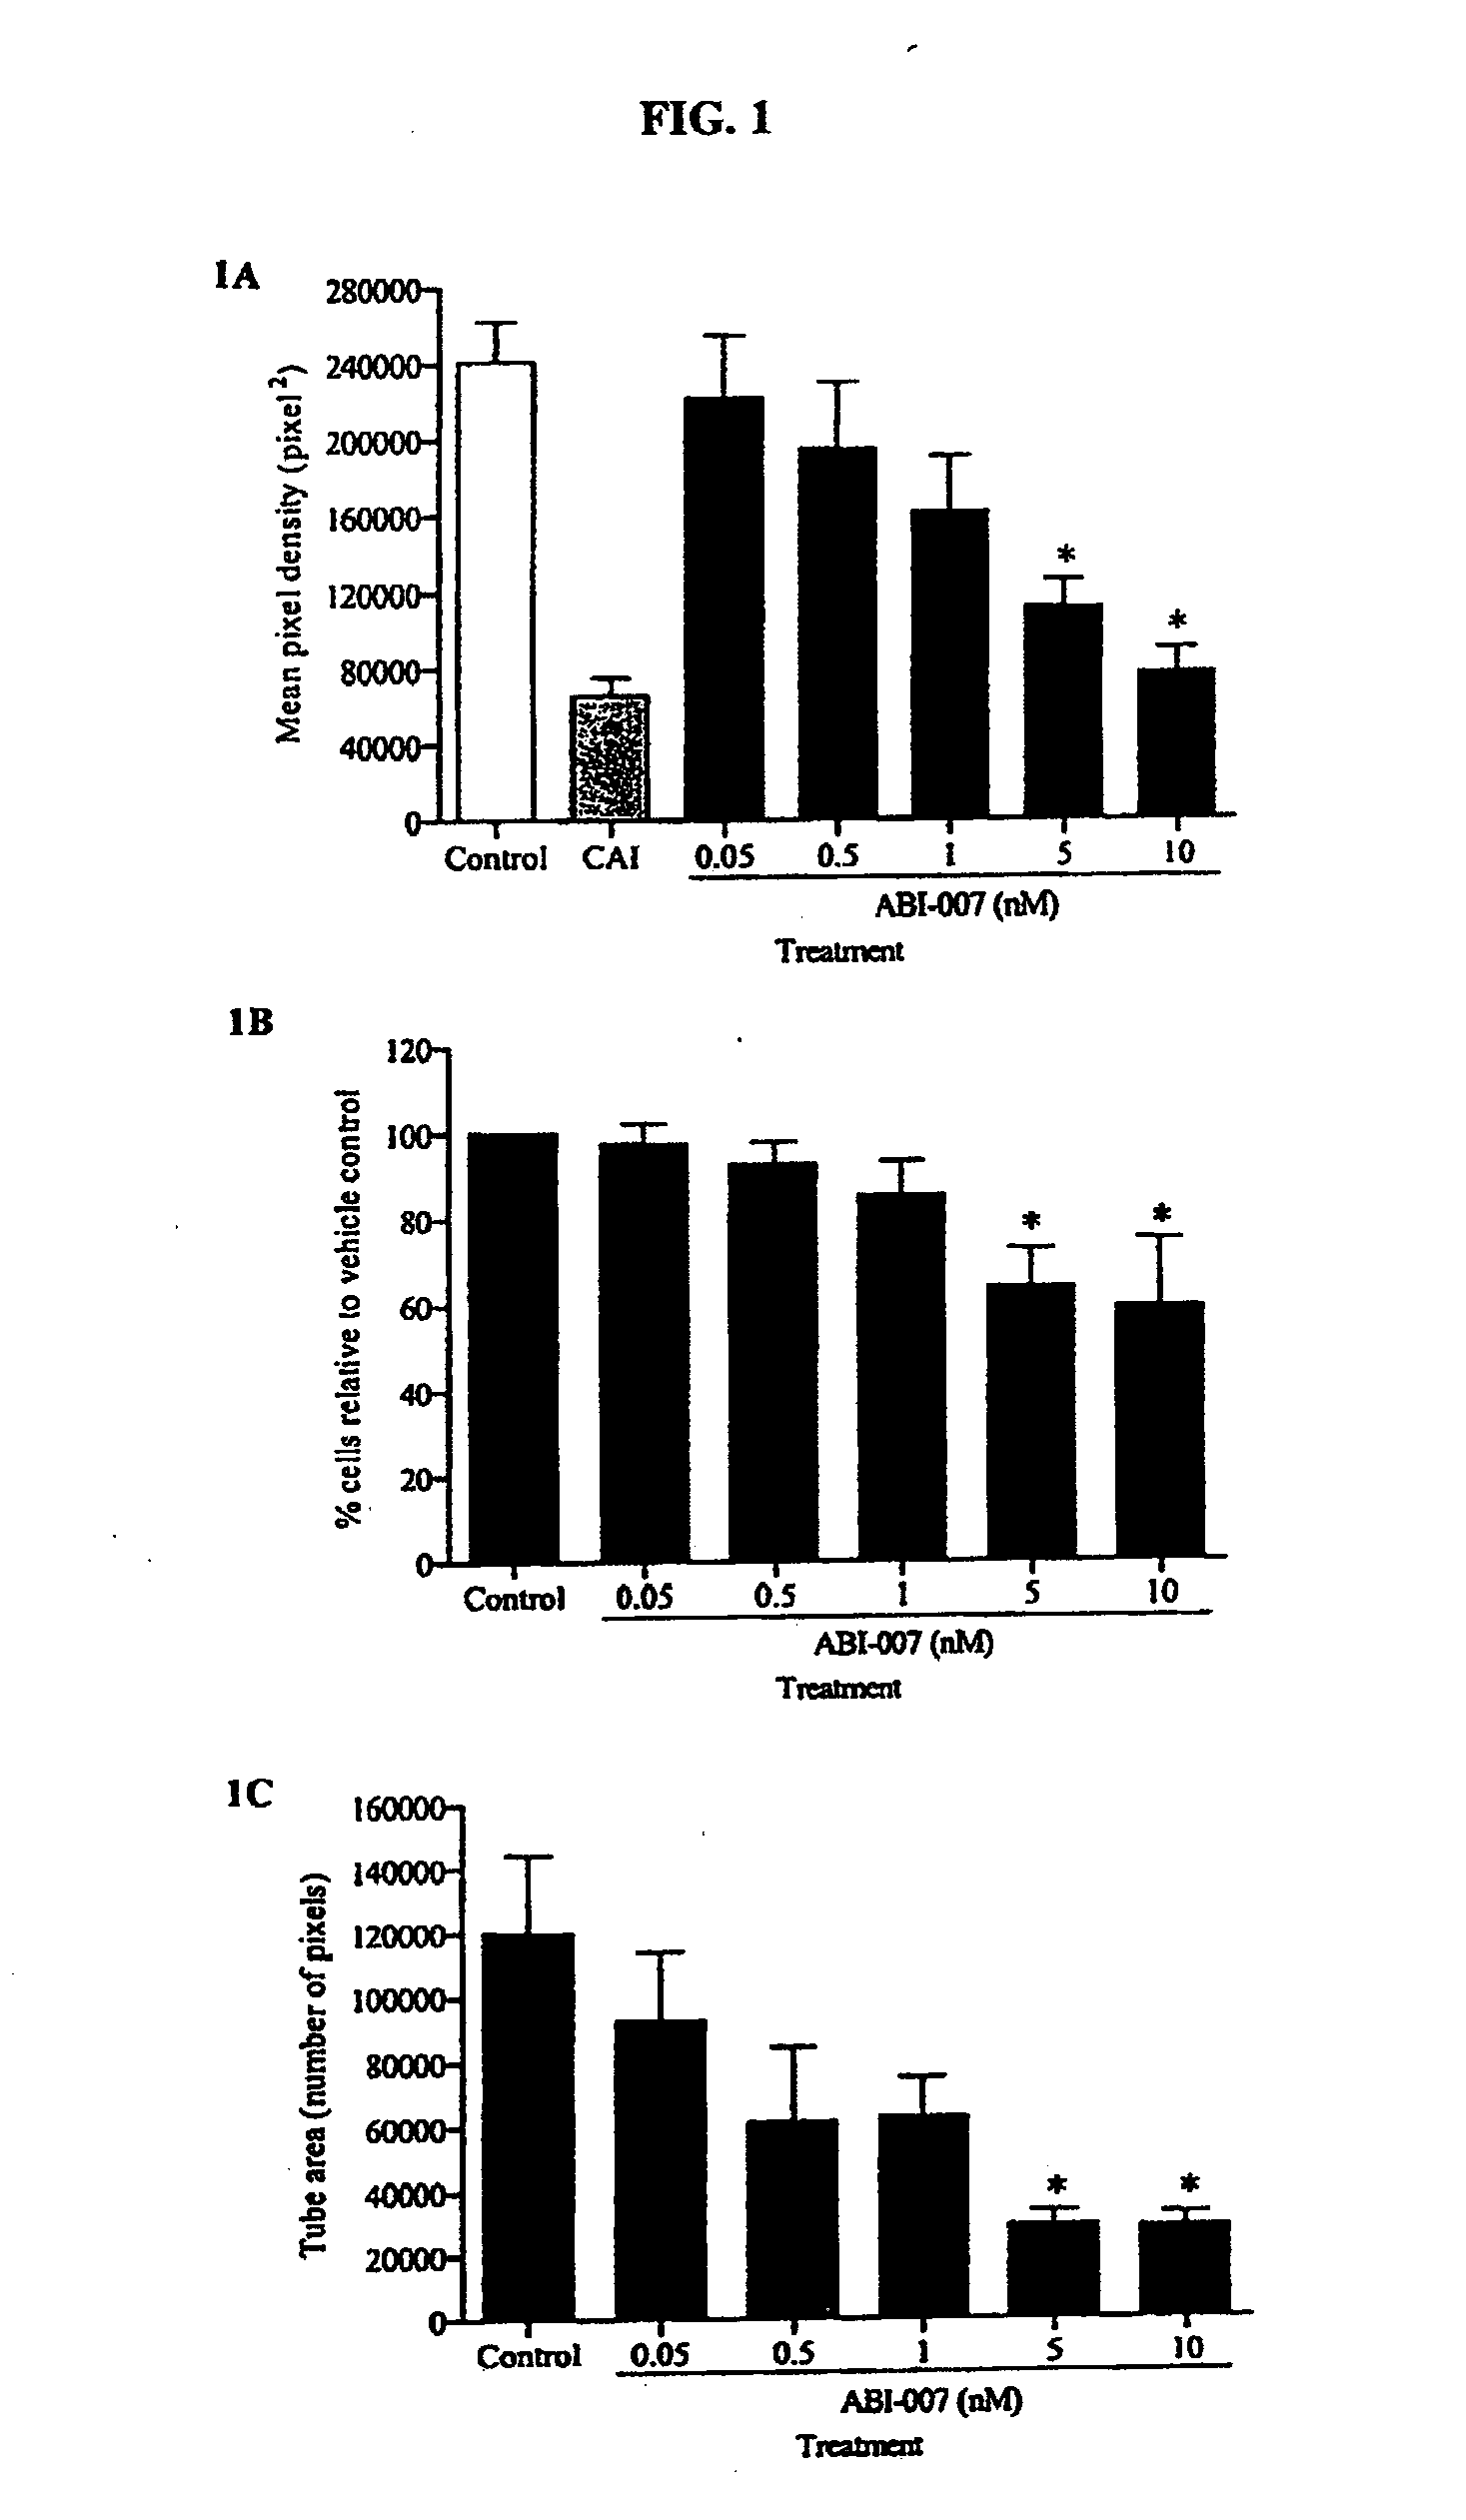 Breast cancer therapy based on hormone receptor status with nanoparticles comprising taxane